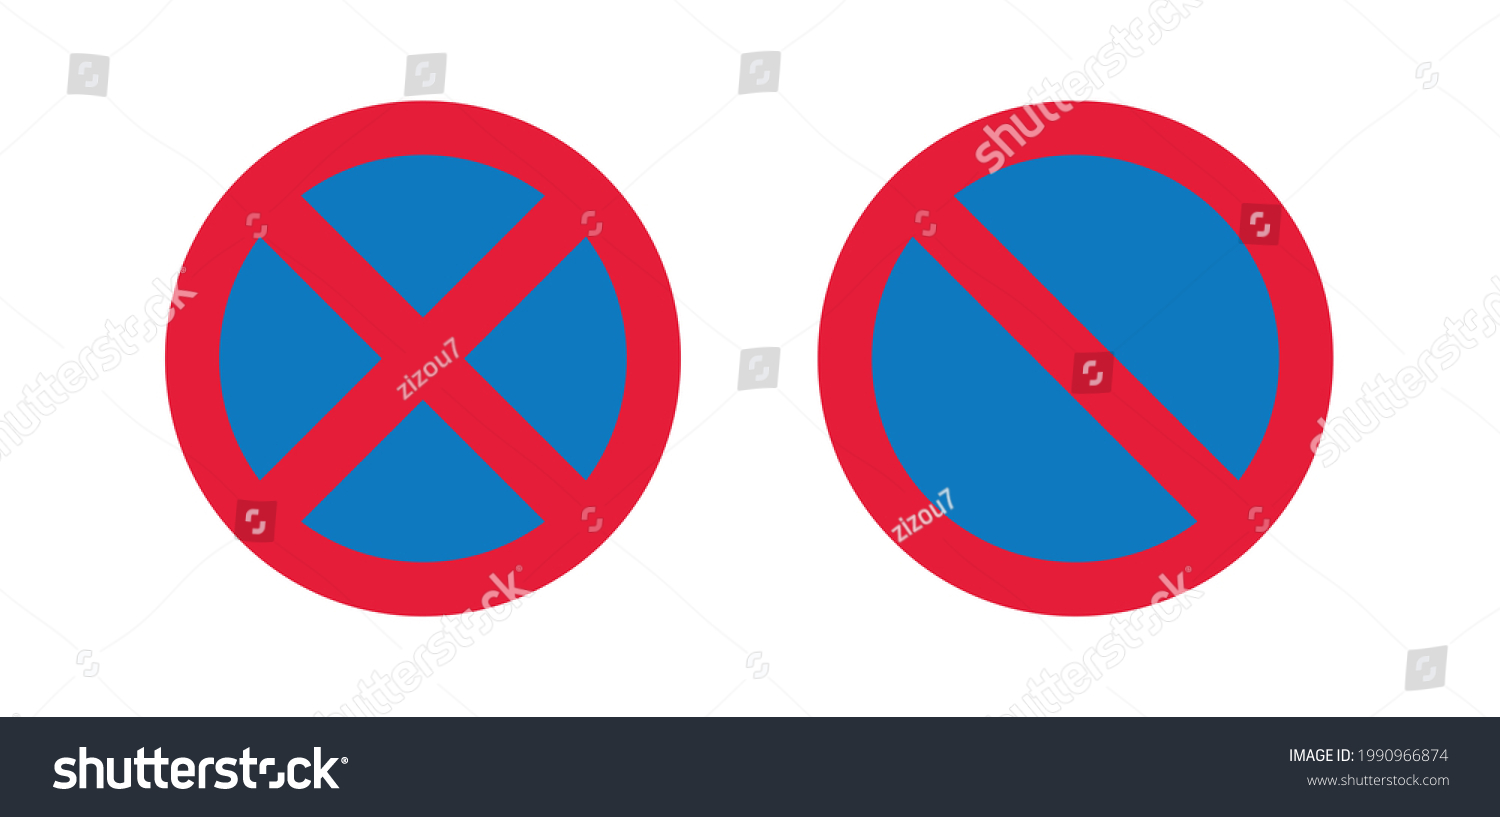 SVG of no stopping and no waiting signs isolated on white background svg